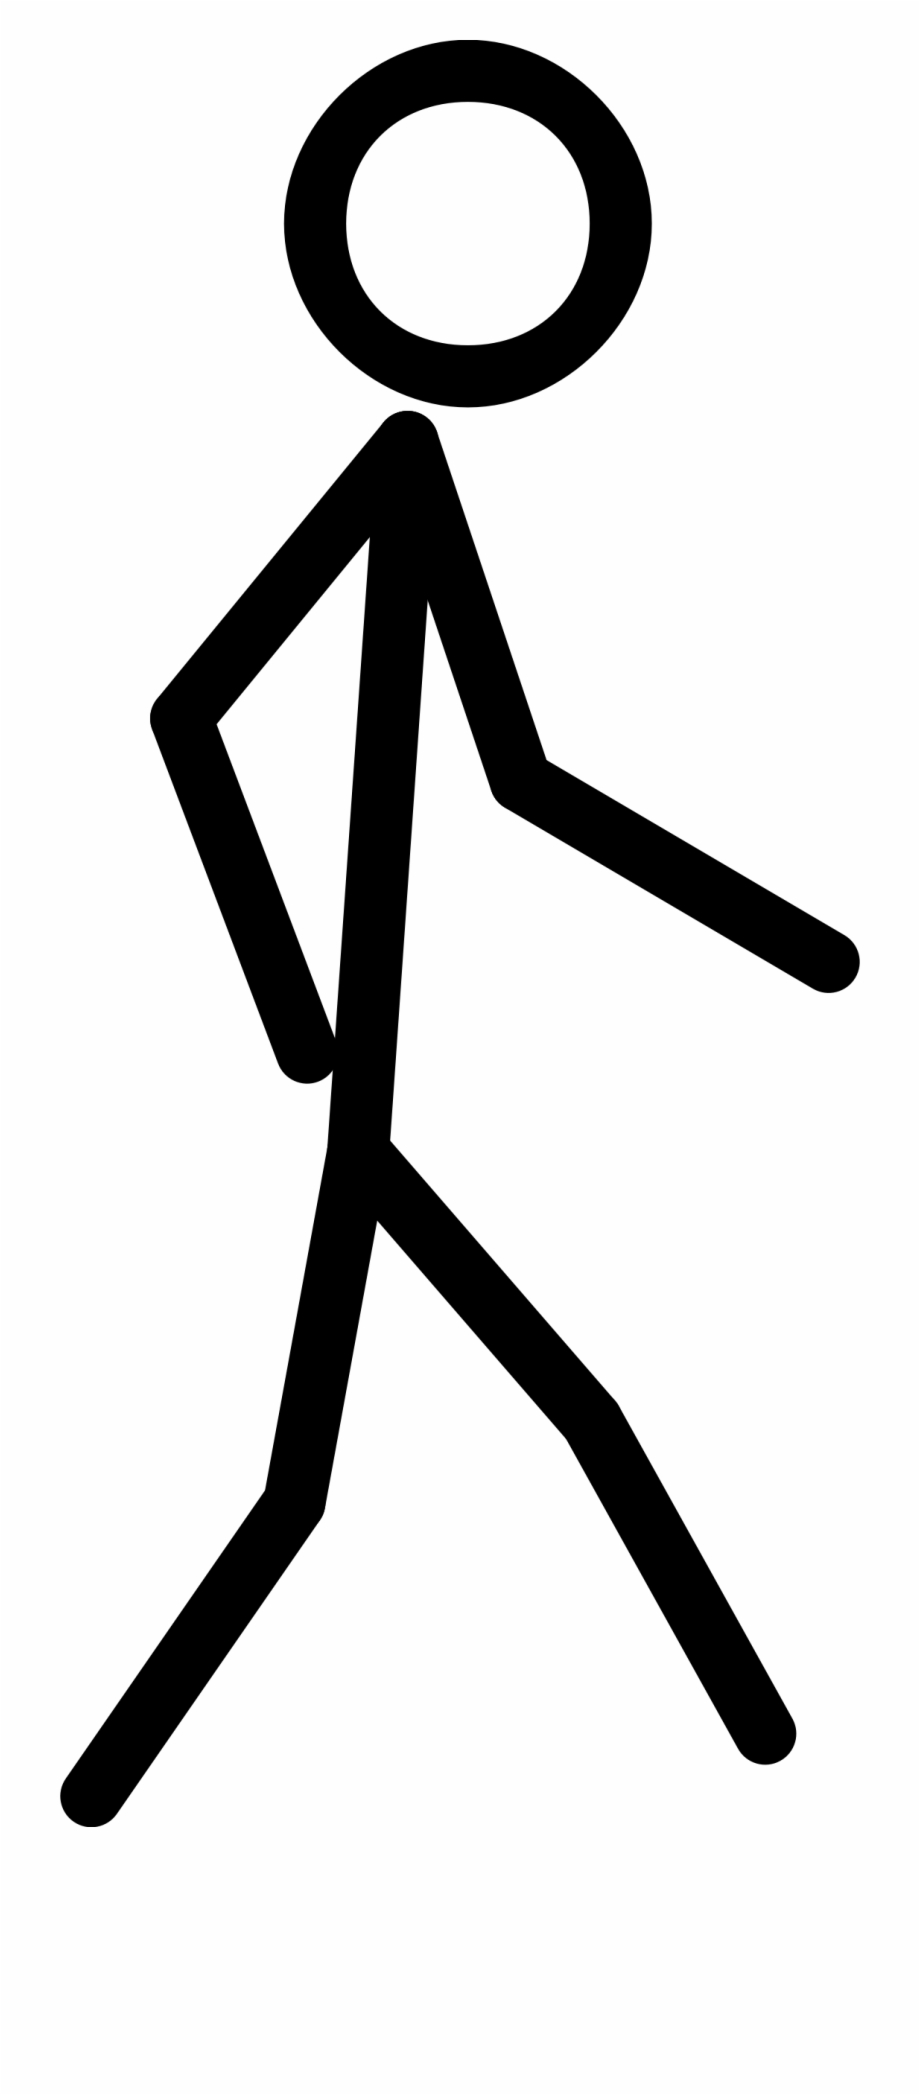 Free Stickman Png, Download Free Stickman Png png images, Free ClipArts ...